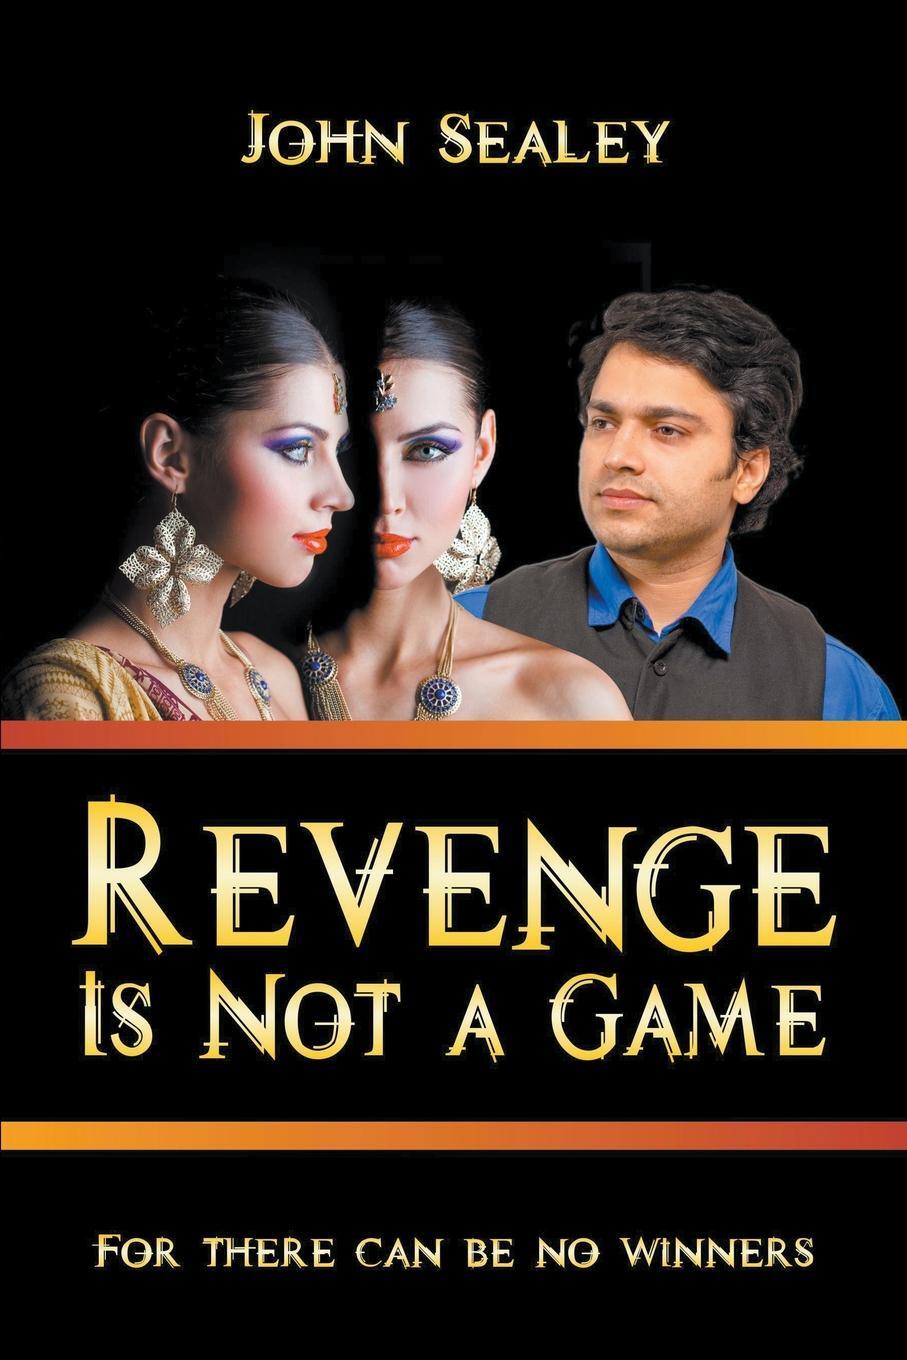 фото Revenge Is Not a Game. For there can be no winners